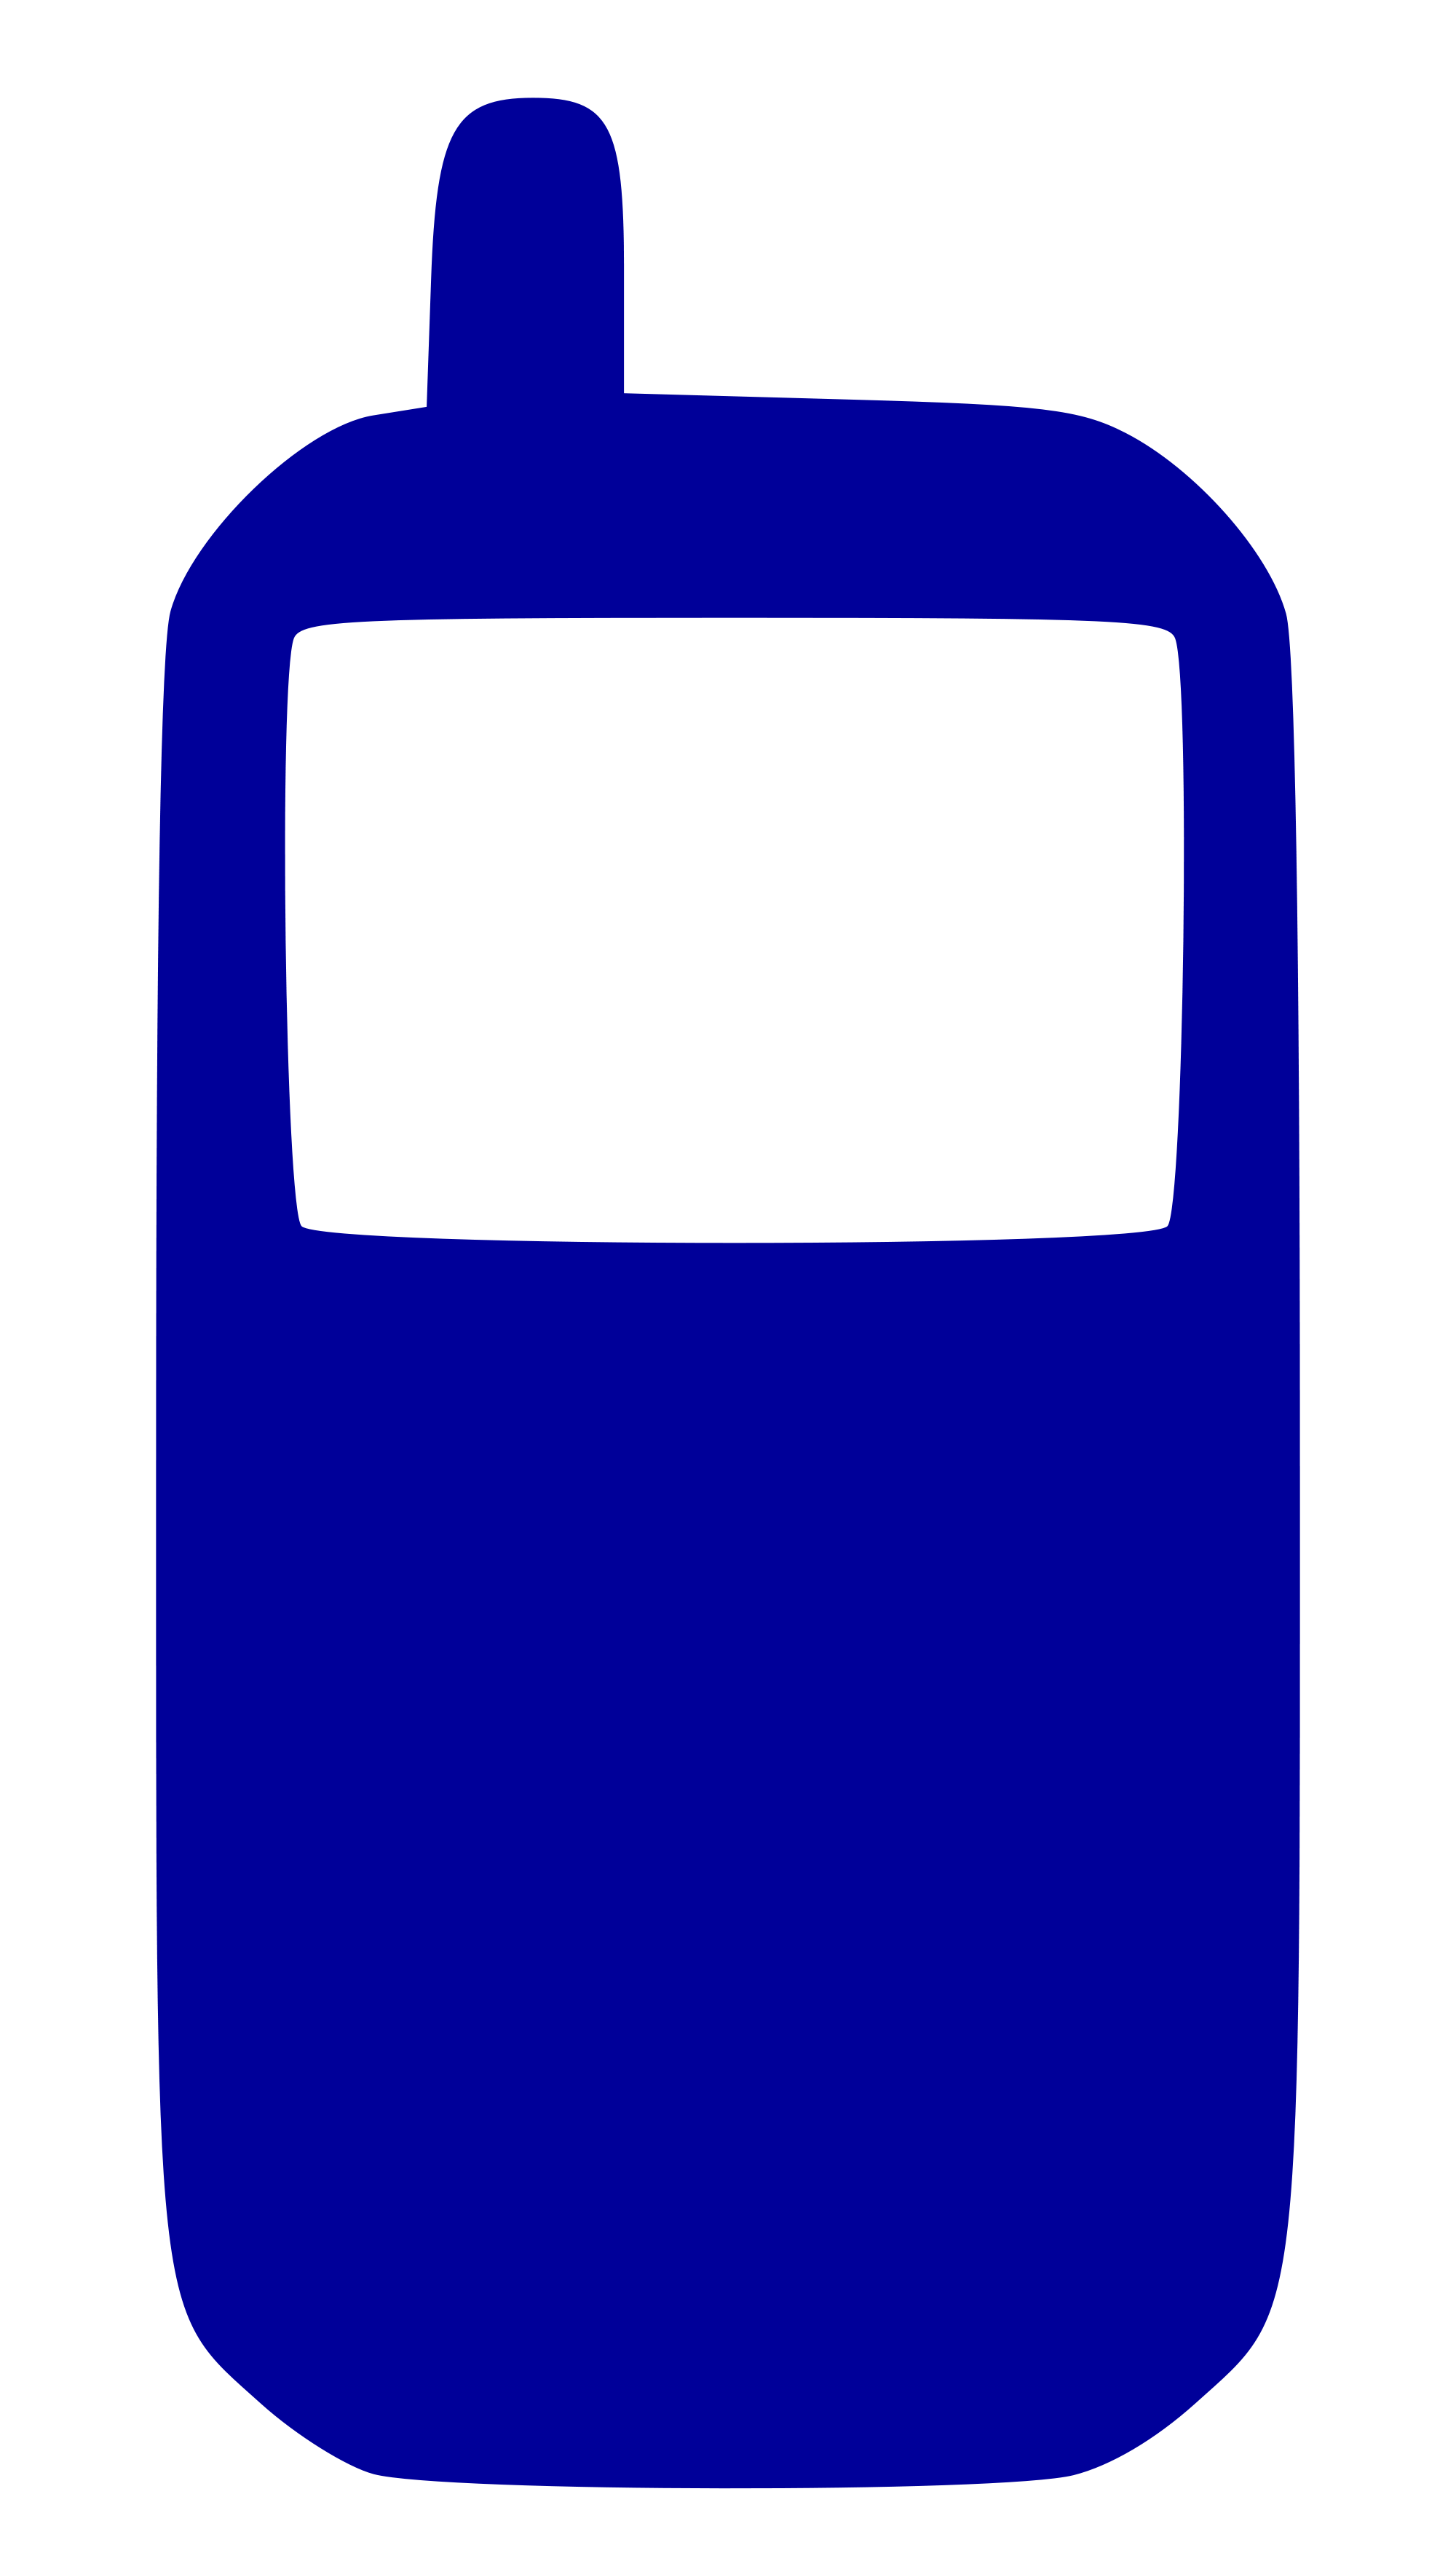 File:Cell phone icon.svg